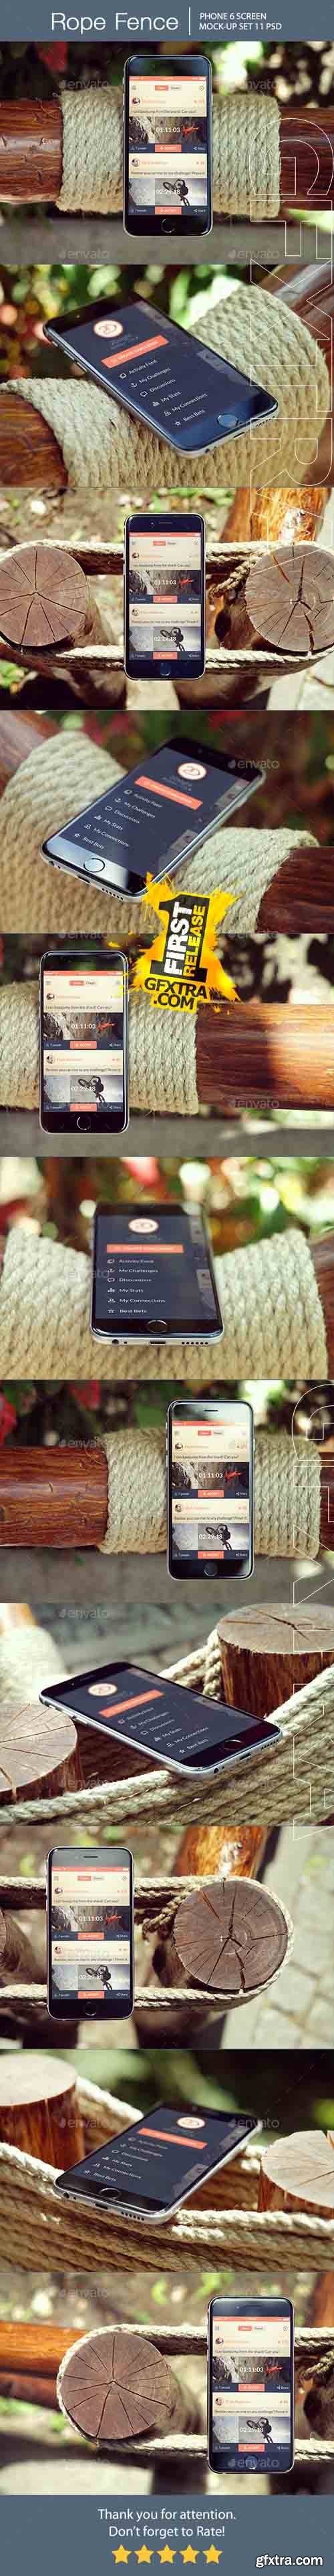 GR - Rope Fence iPhone 6 Mockup 14164235